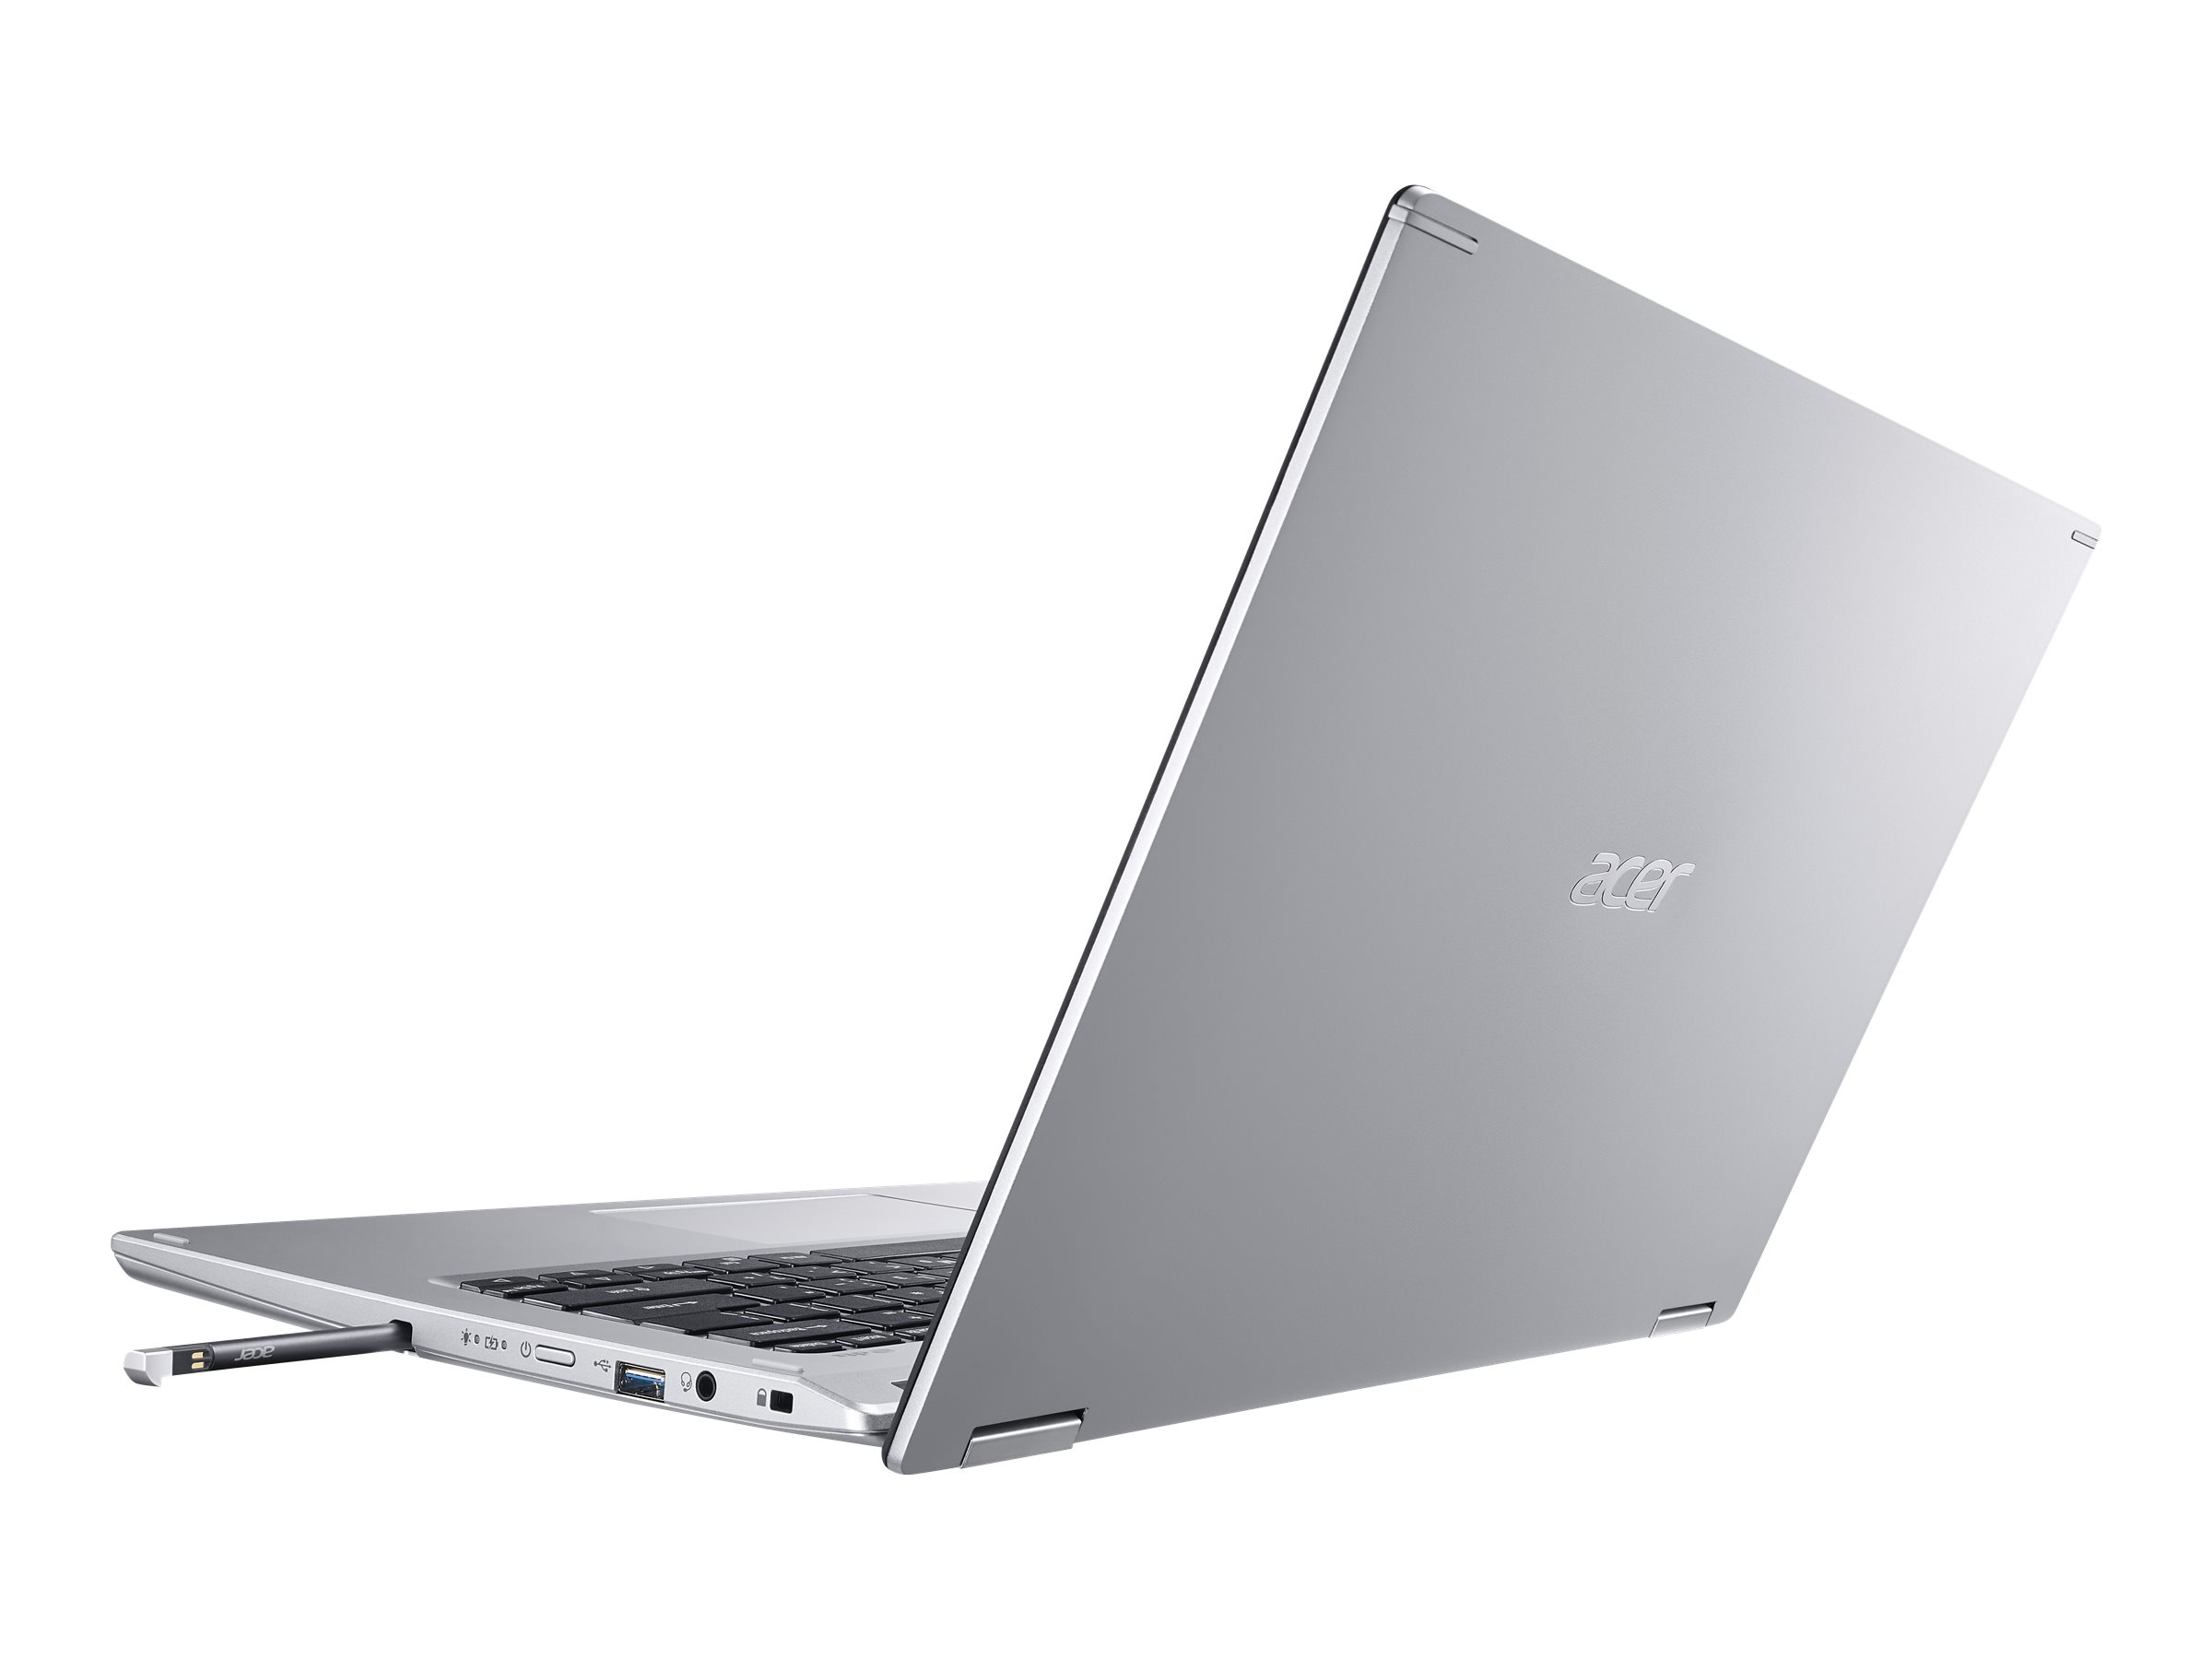 Acer Spin 3, 14.0" Full HD IPS Touch, Thunderbolt 3, Convertible, 10th Gen Intel Core i5-1035G1, 8GB LPDDR4, 256GB NVMe SSD, Silver, Windows 10, SP314-54N-58Q7 - image 5 of 18